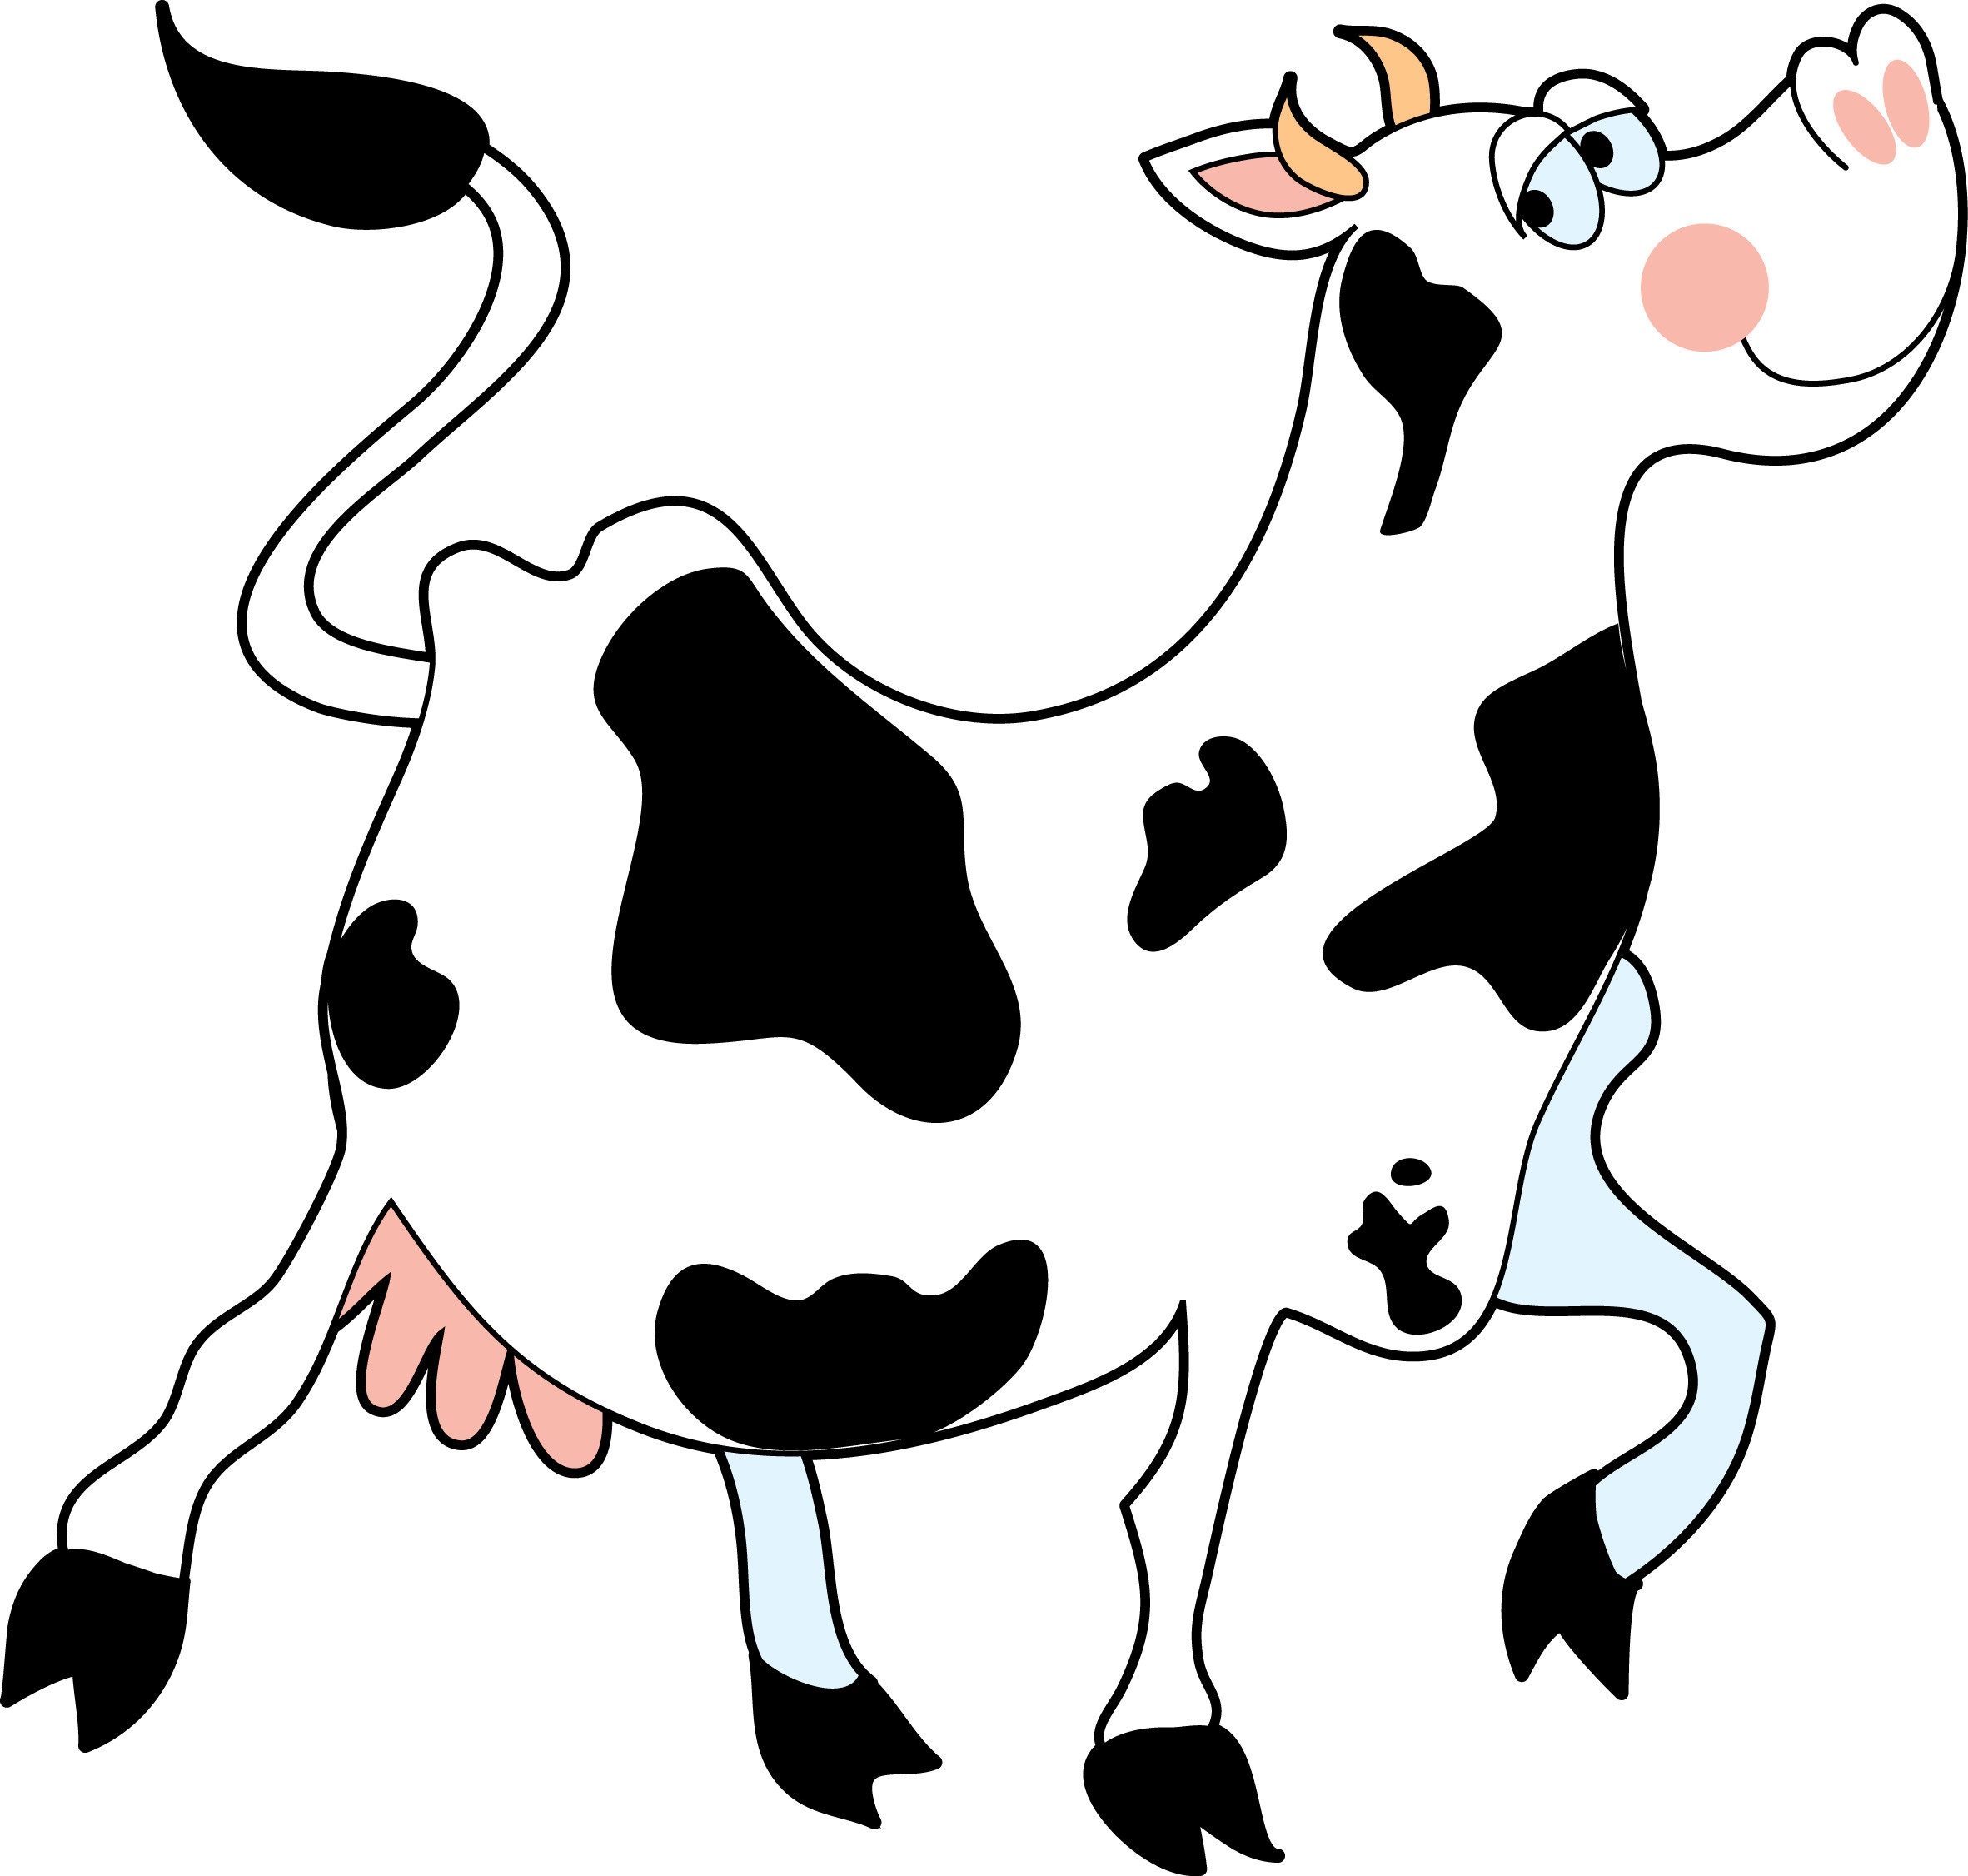 Cow Template Printable - ClipArt Best